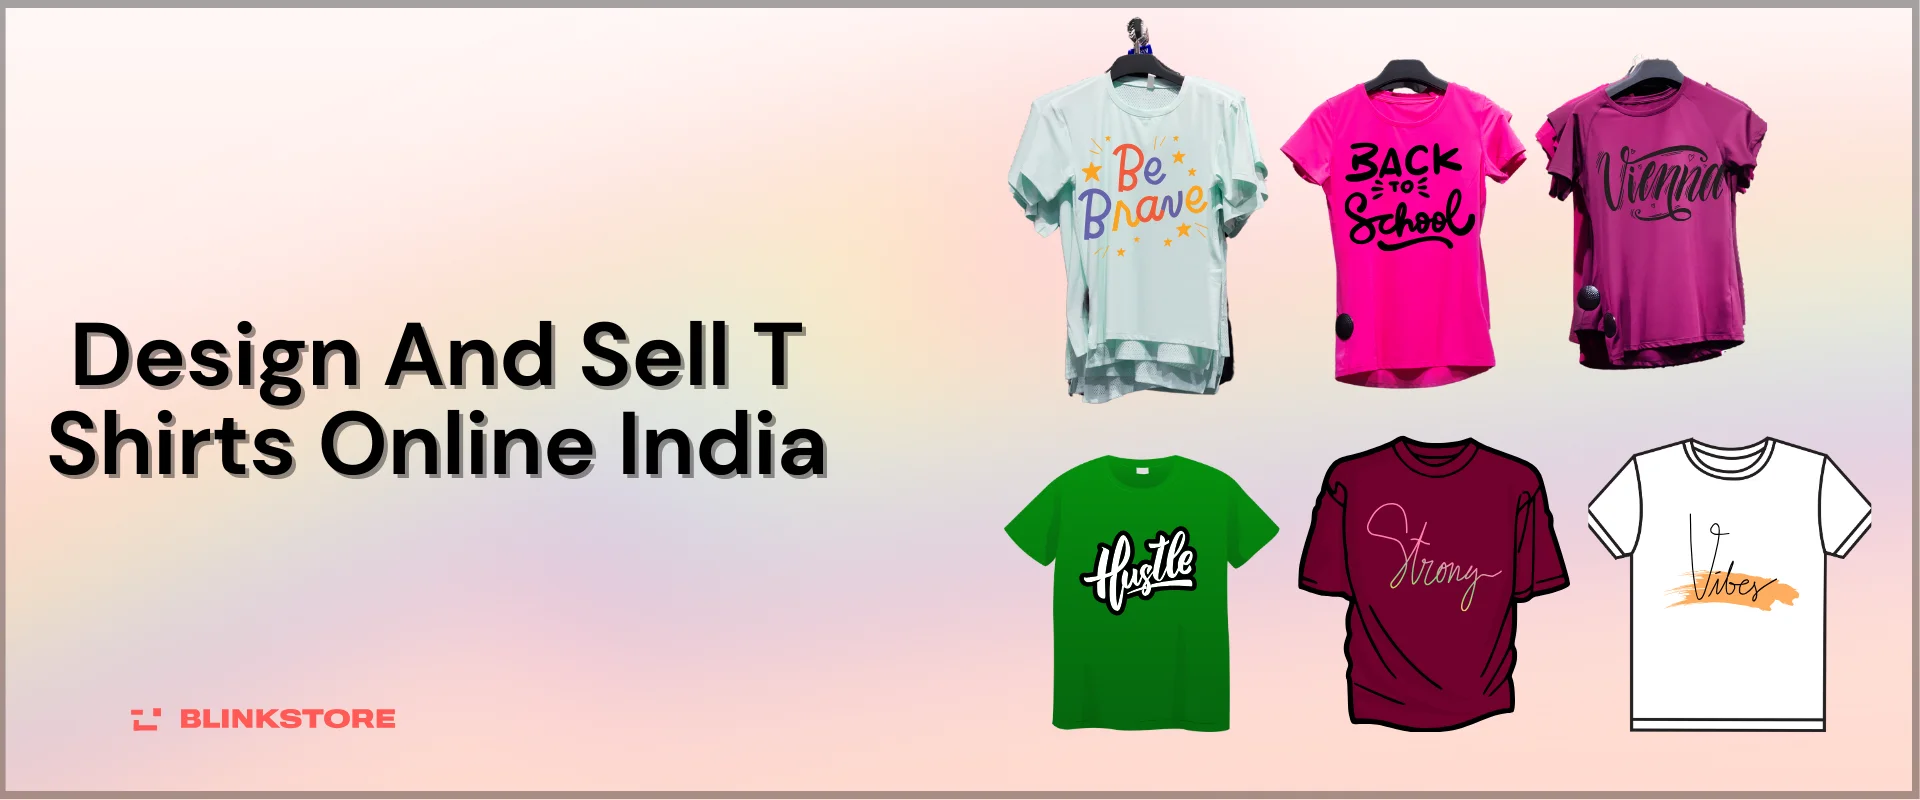 Design And Sell T Shirts Online India